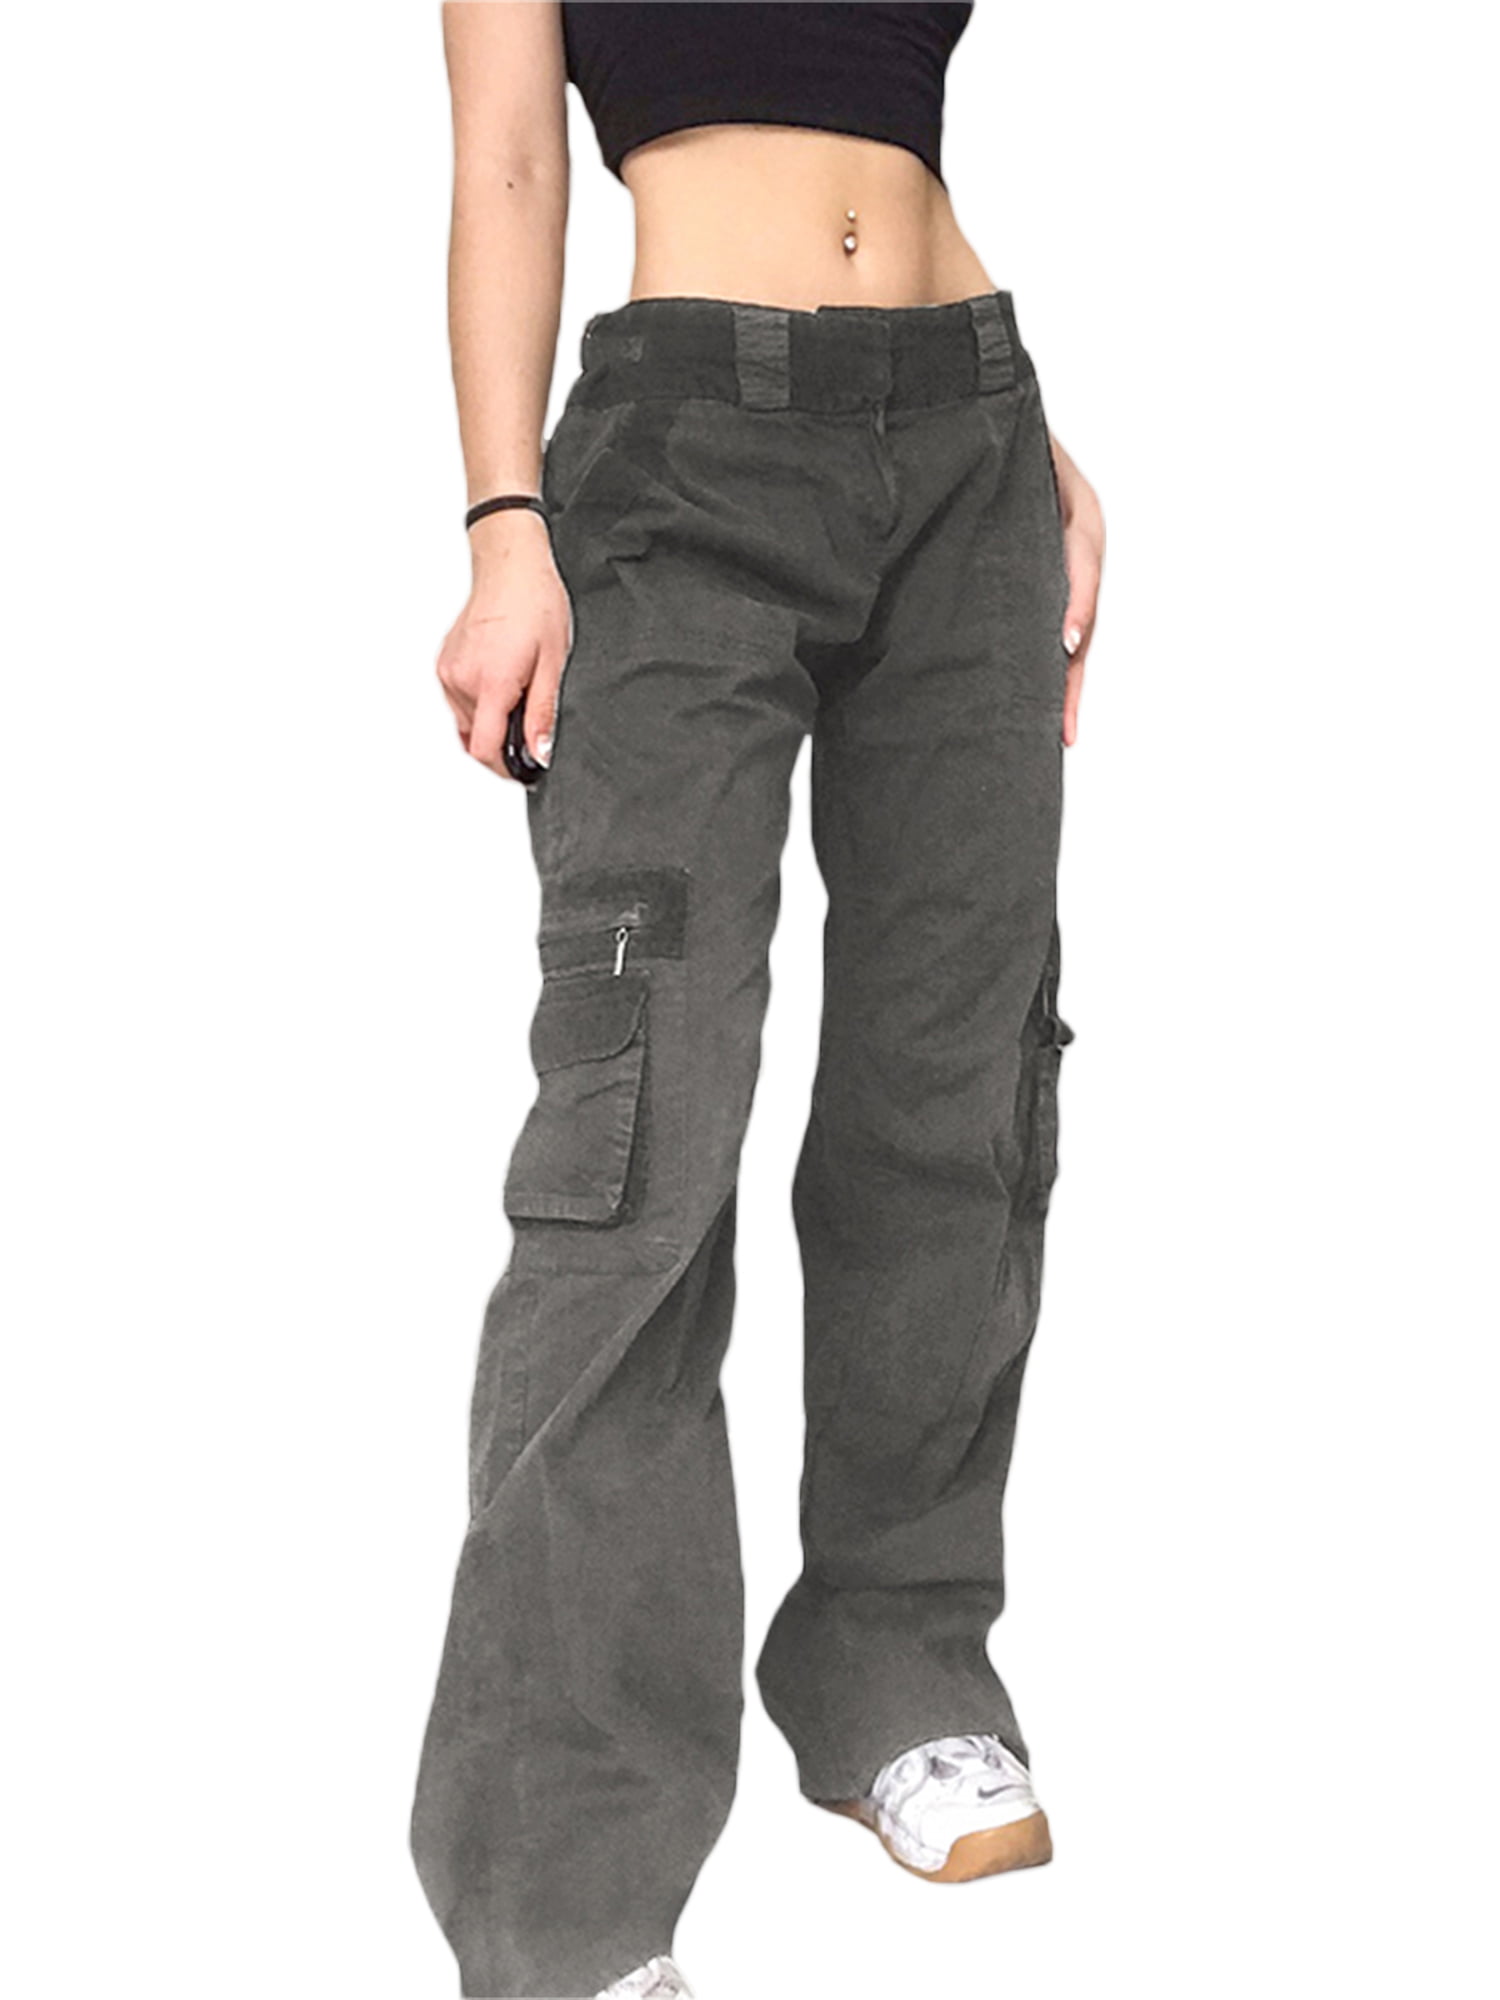 Uneek UC904 Cargo Trouser with Knee Pad Pockets - PPE Work Solutions